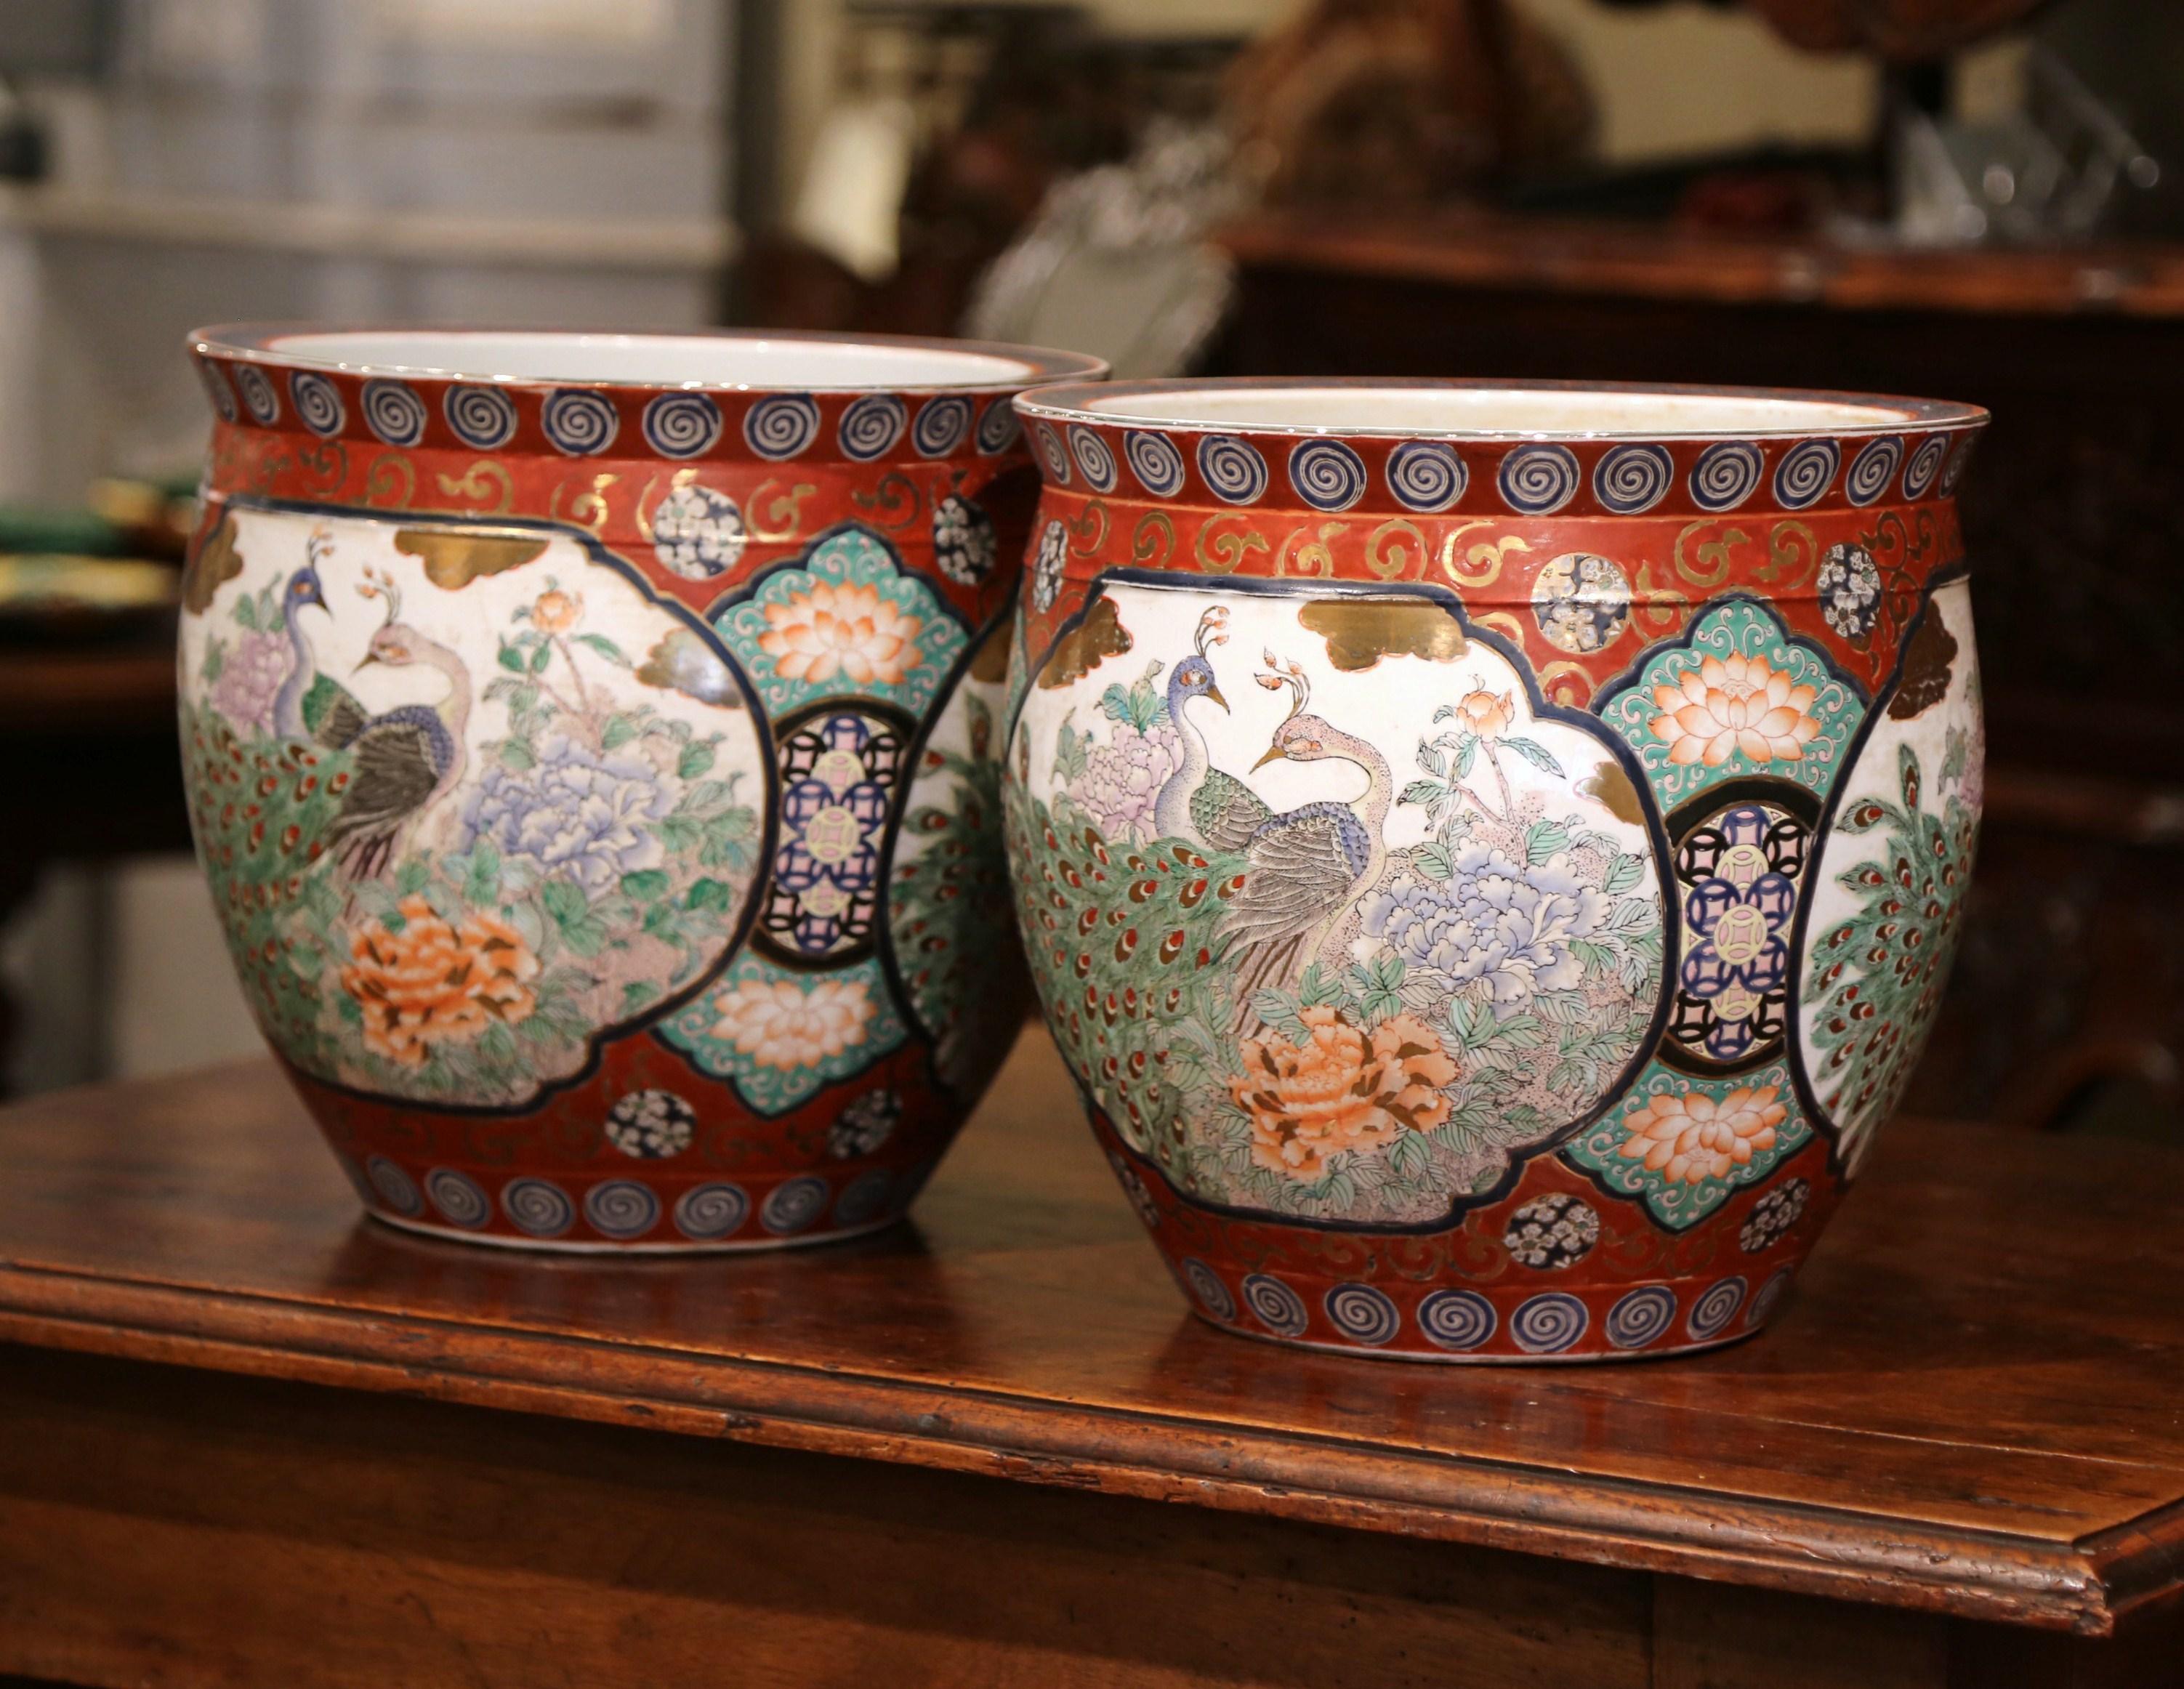 Crated in China, circa 1920, each porcelain planter is hand painted with peacock medallions and floral decor, and embellished with gilt motifs. The pots are in excellent condition, signed on the bottom and adorn rich colors in the red palette. Fill